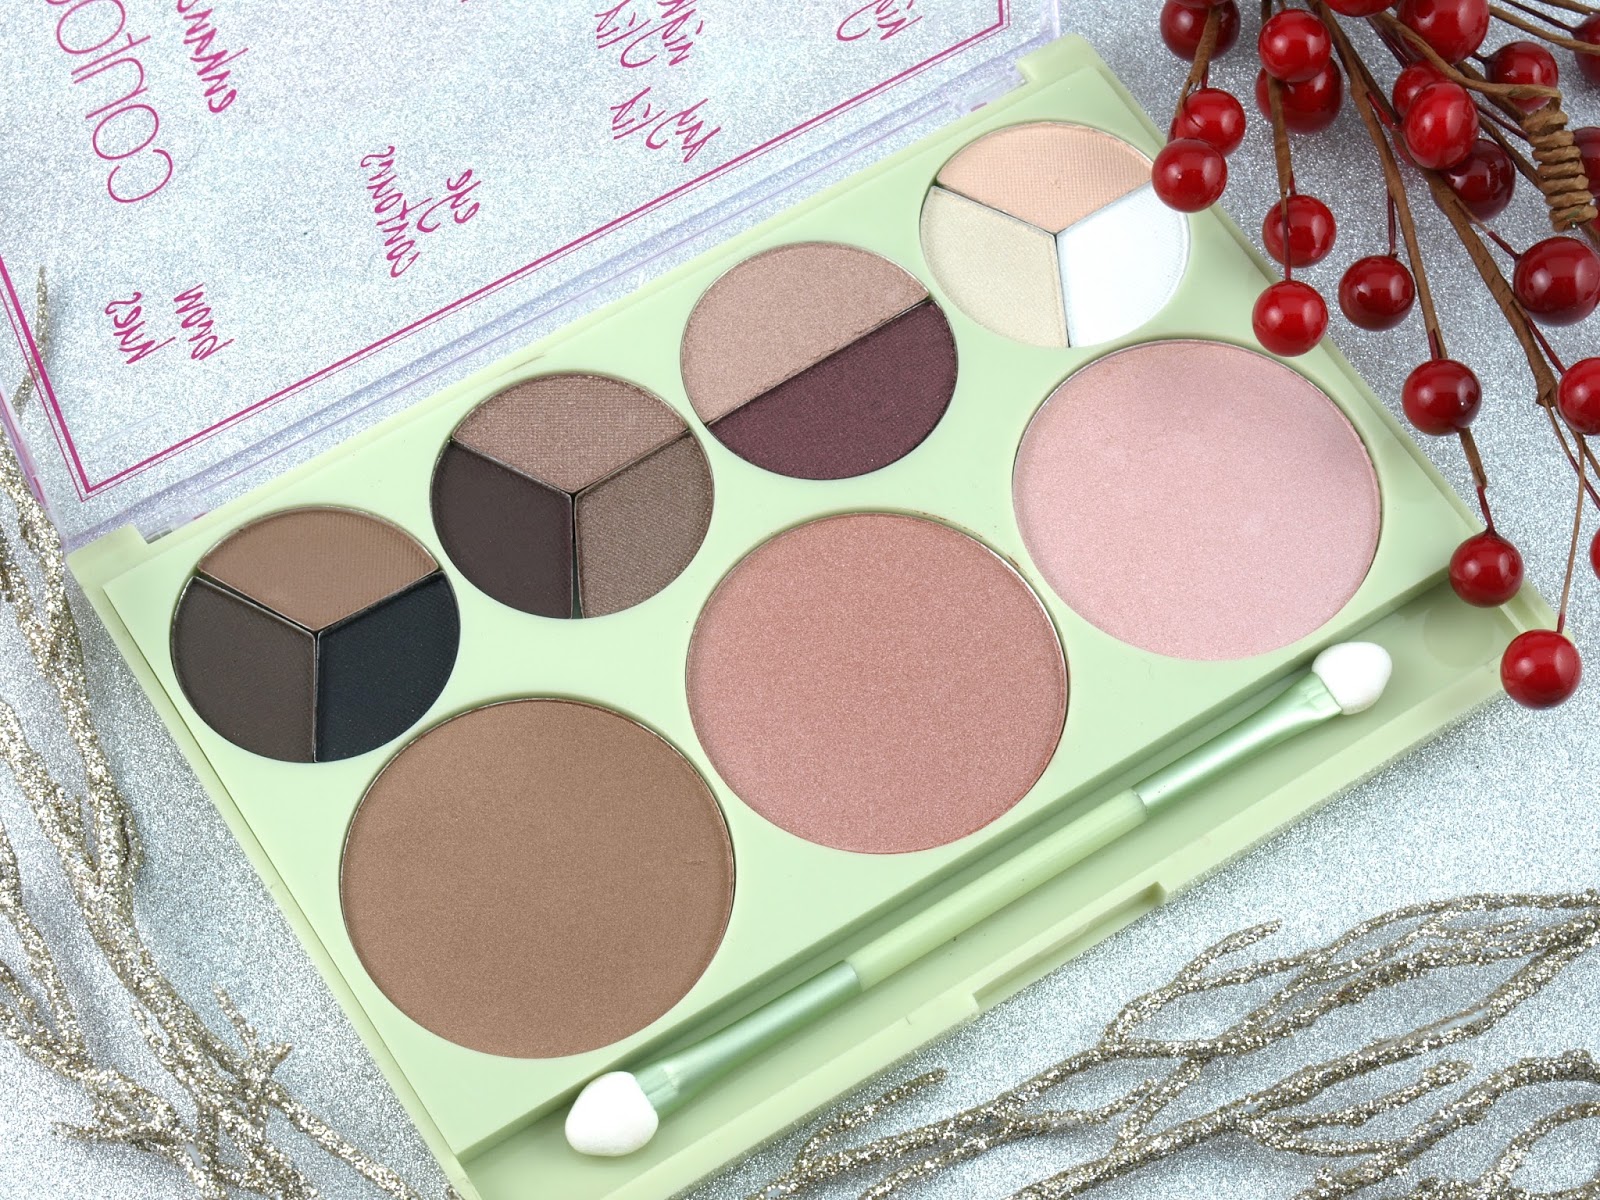 Pixi Holiday 2016 Palette Rosette: Review and Swatches